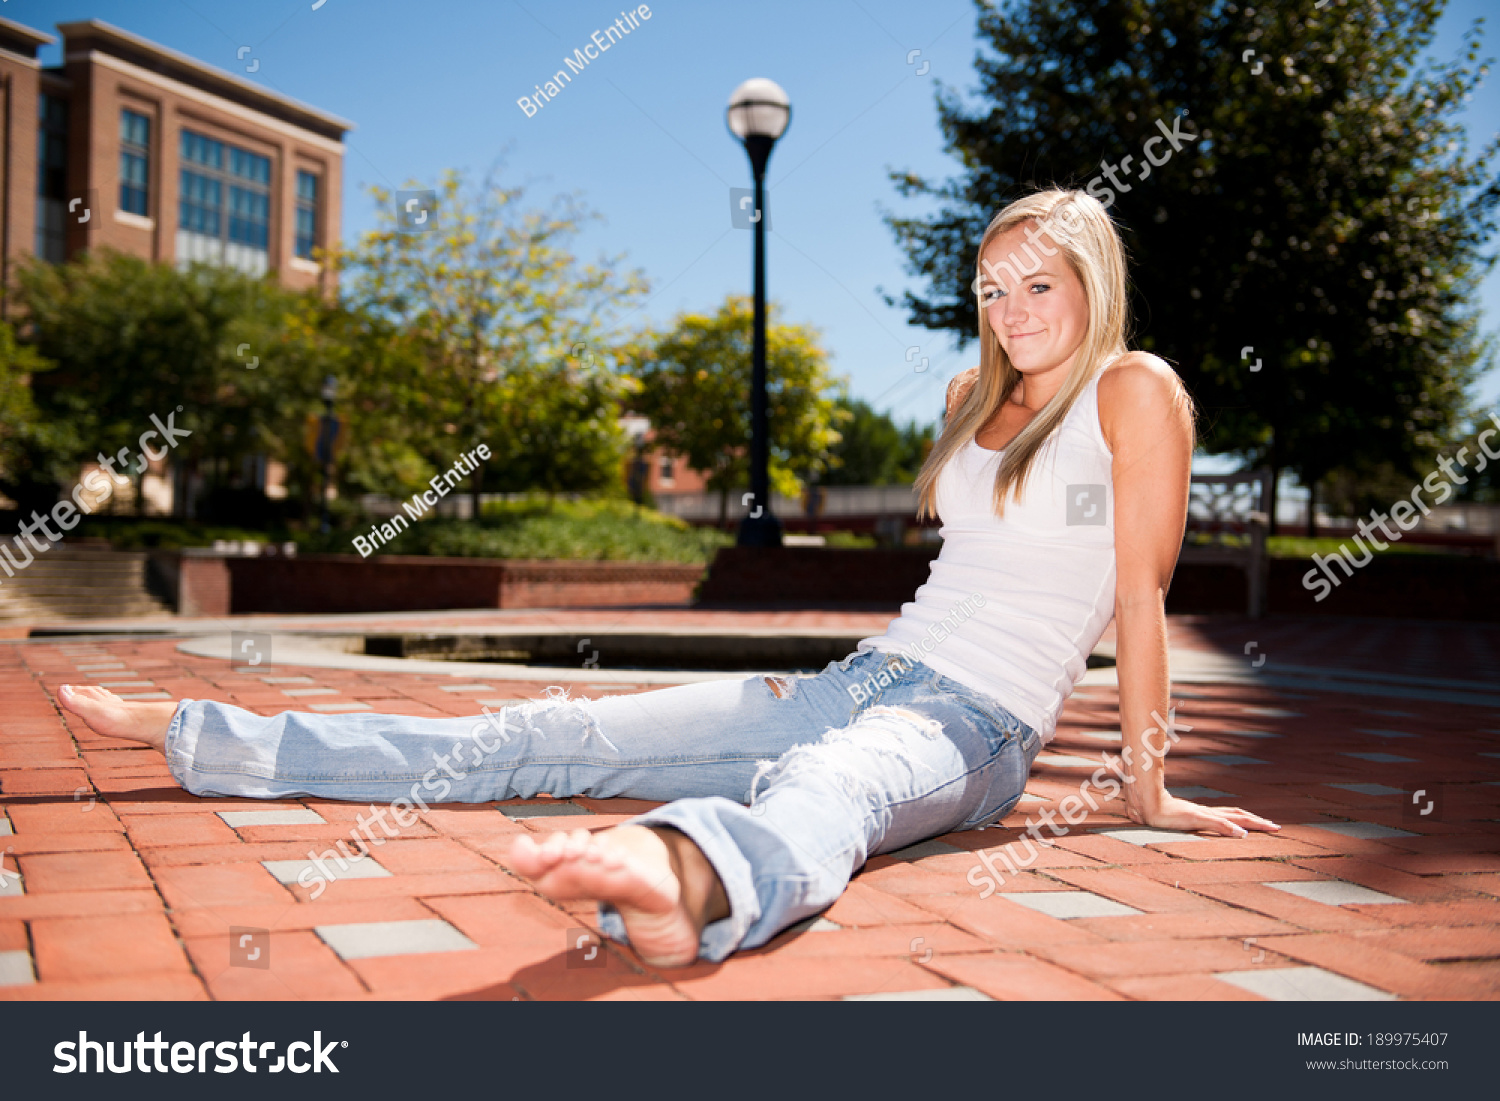 https://image.shutterstock.com/shutterstock/photos/189975407/display_1500/stock-photo-fit-young-blond-woman-casually-sitting-in-urban-environment-189975407.jpg